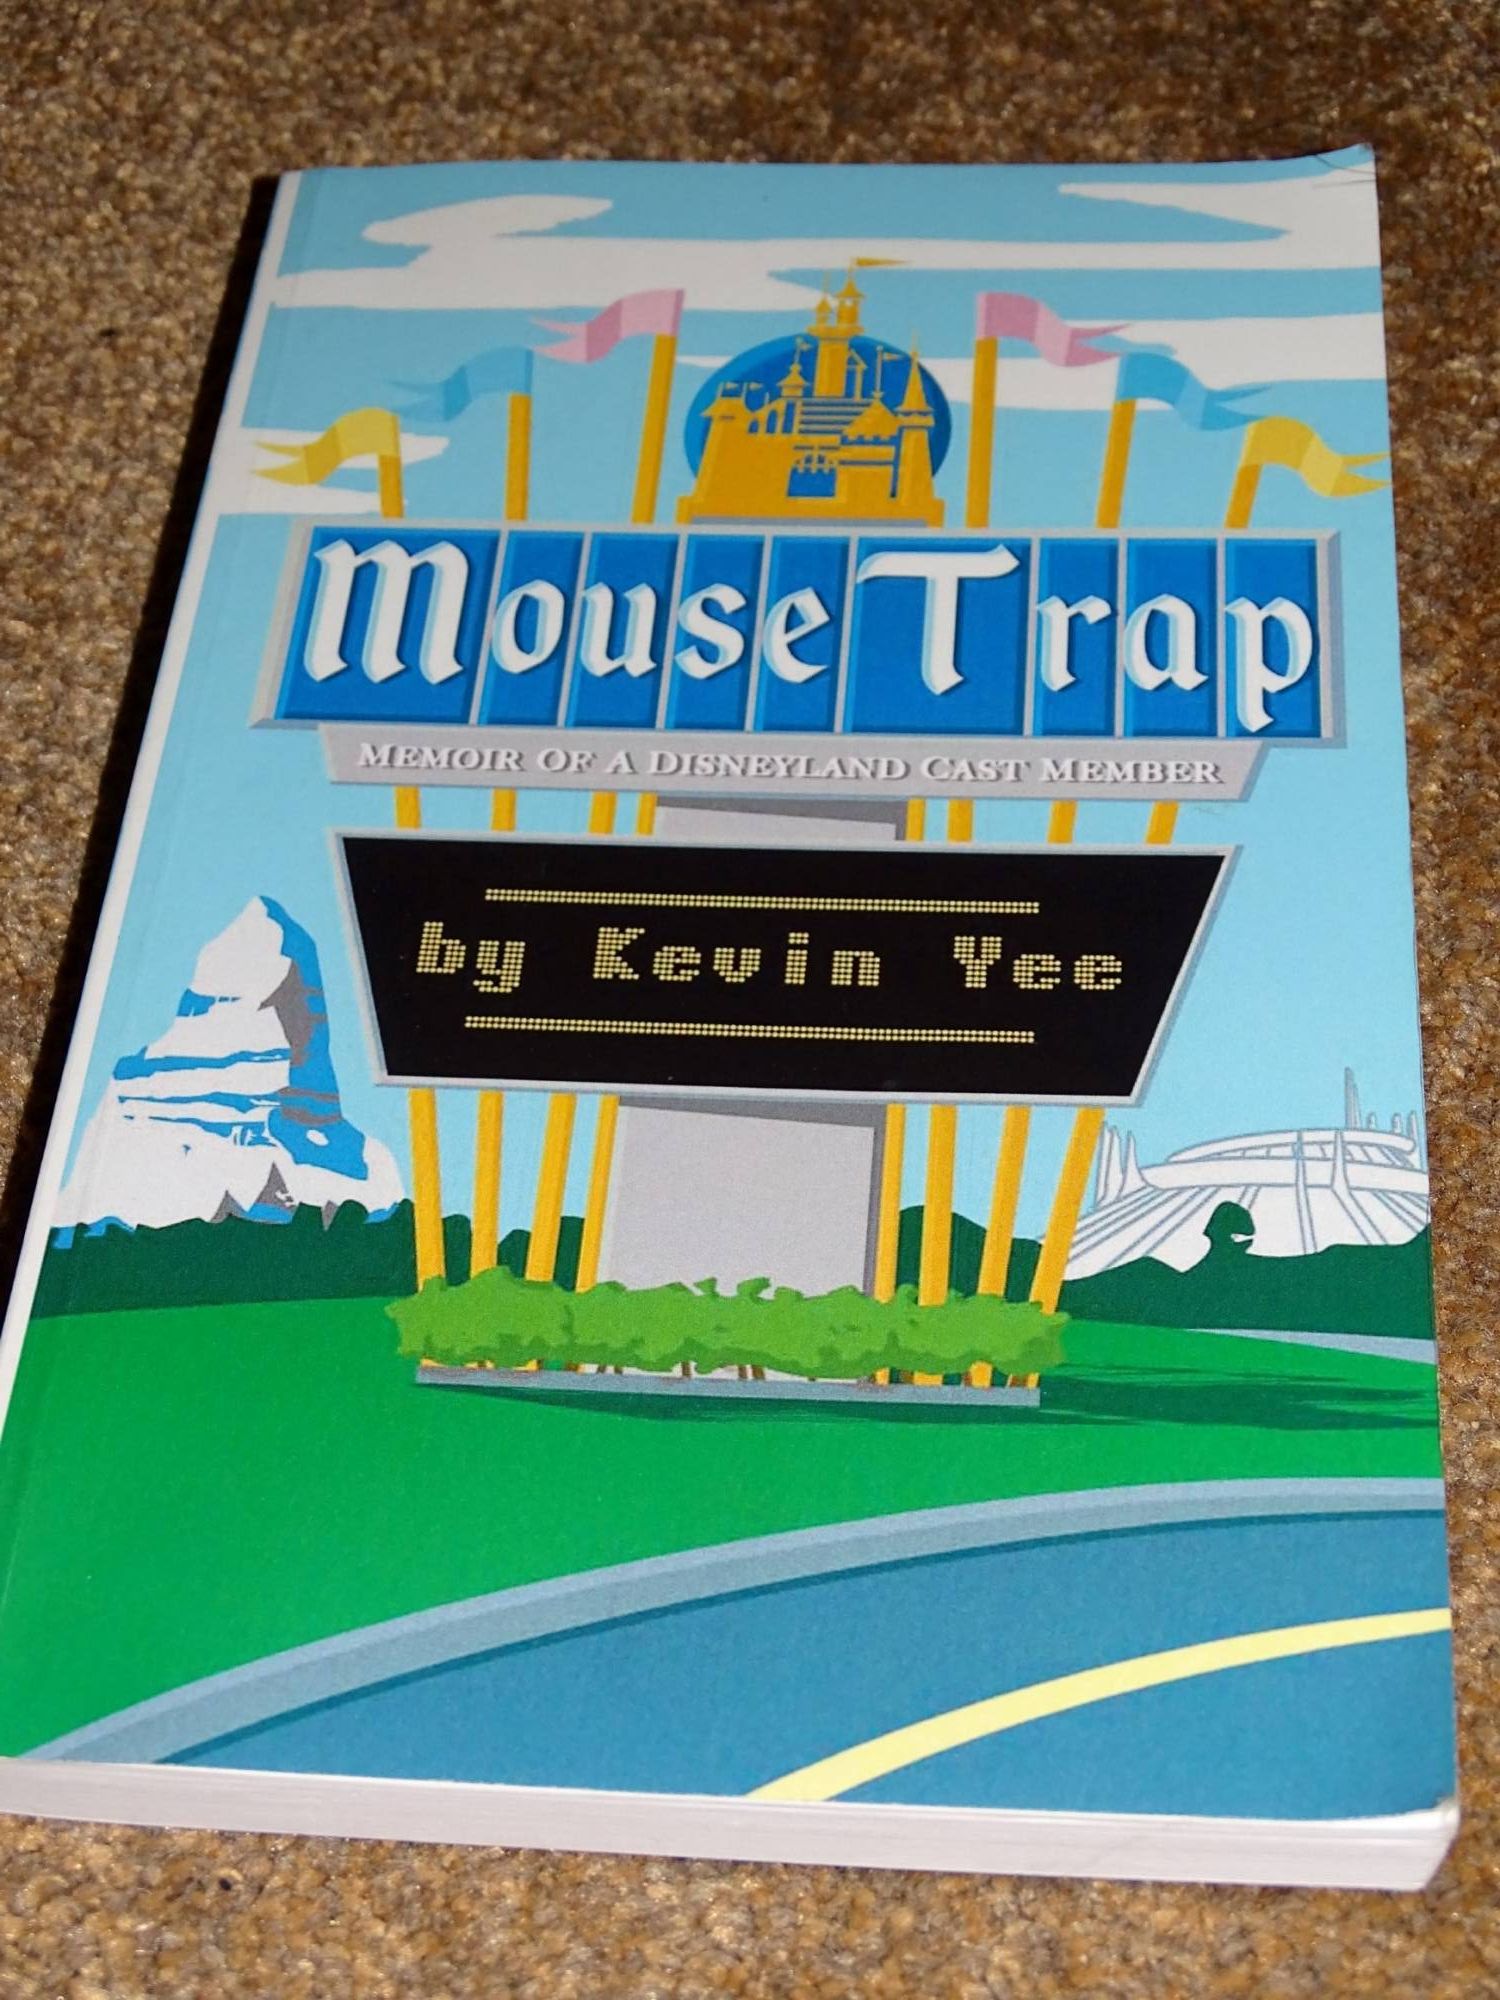 Learn what it is like to be a Disneyland Cast Member in Mouse Trap by Kevin Yee |PassPorter.com